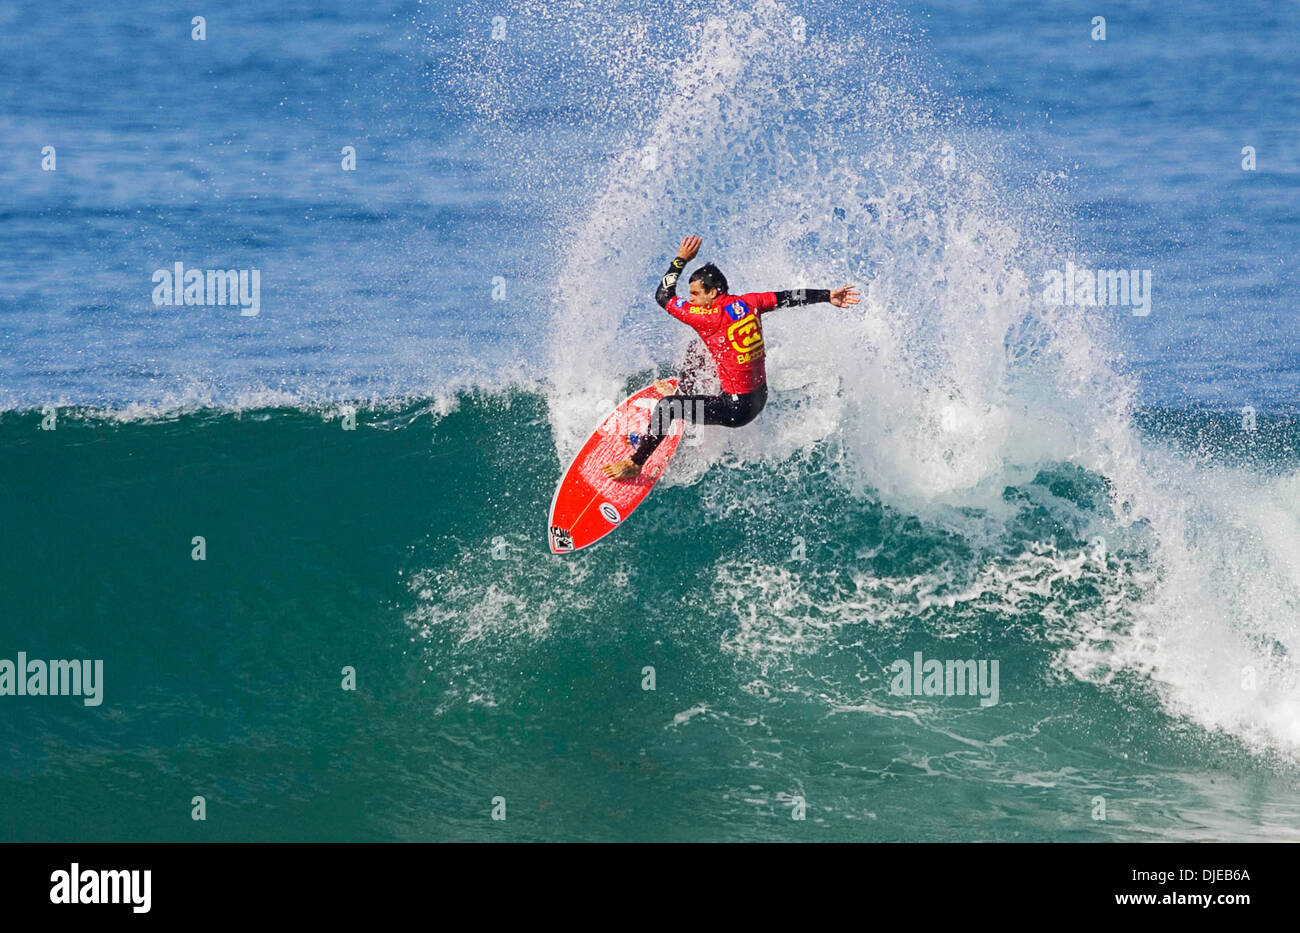 Jul 17, 2004; Jeffreys Bay, Eastern Cape, South Africa; PETERSON ROSA beat Tom Whitaker (Aus) in round three of the Billabong Pro at Jeffreys Bay, South Africa today. Rosa advanced to round four where he will meet six times ASP world champion and defending Billabong Pro champion Kelly Slater (Florida, USA). Stock Photo